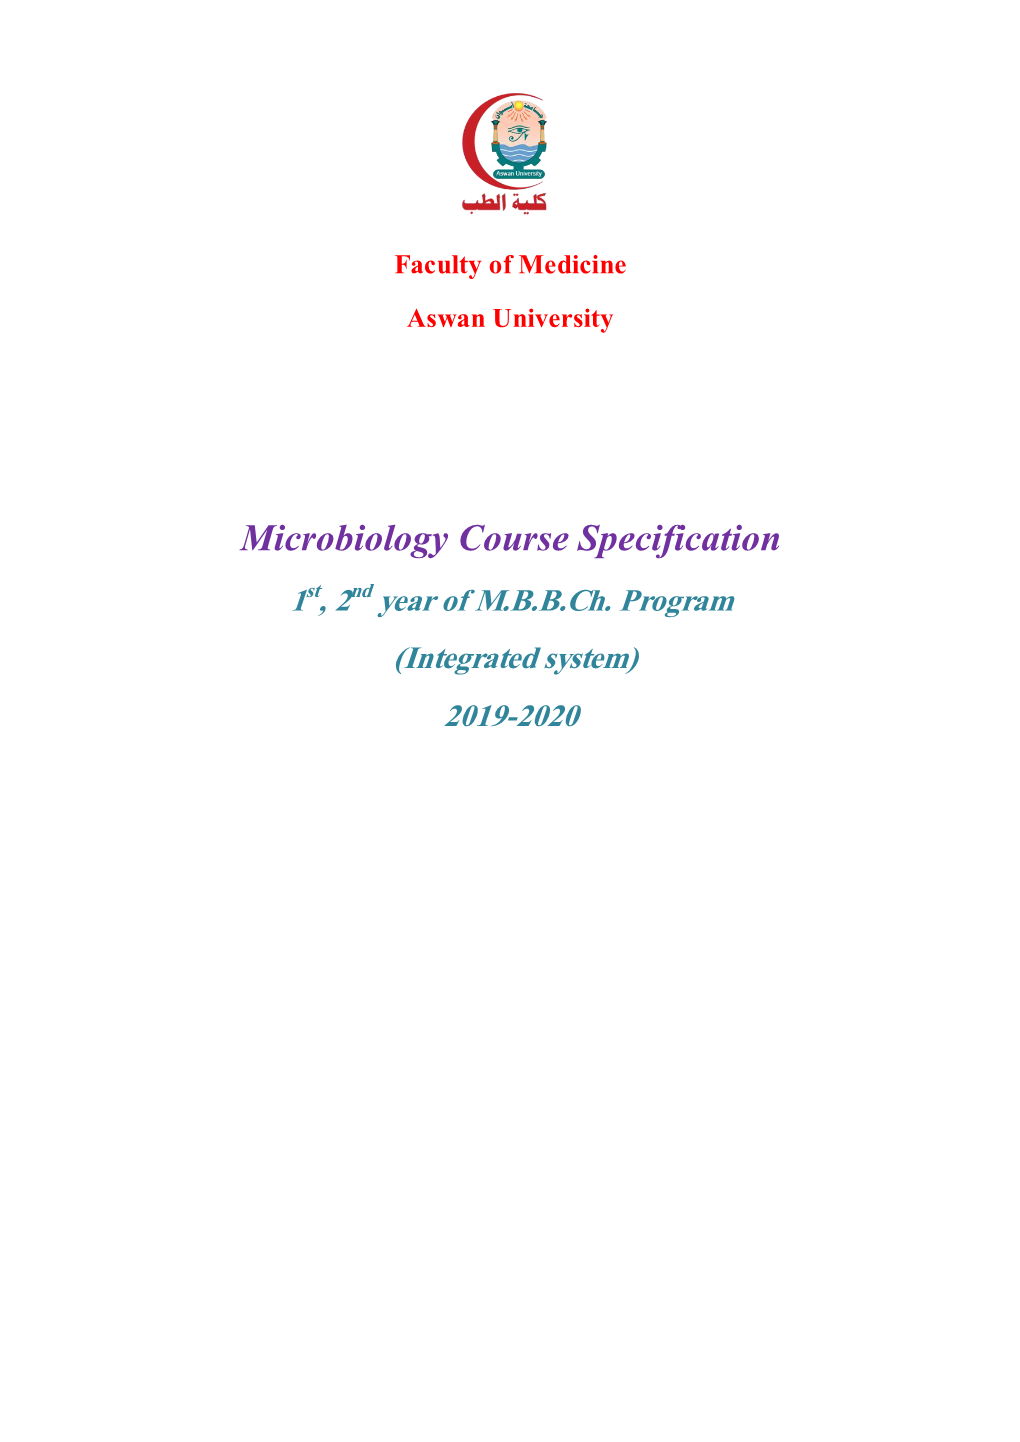 Microbiology Course Specification 1St, 2Nd Year of M.B.B.Ch